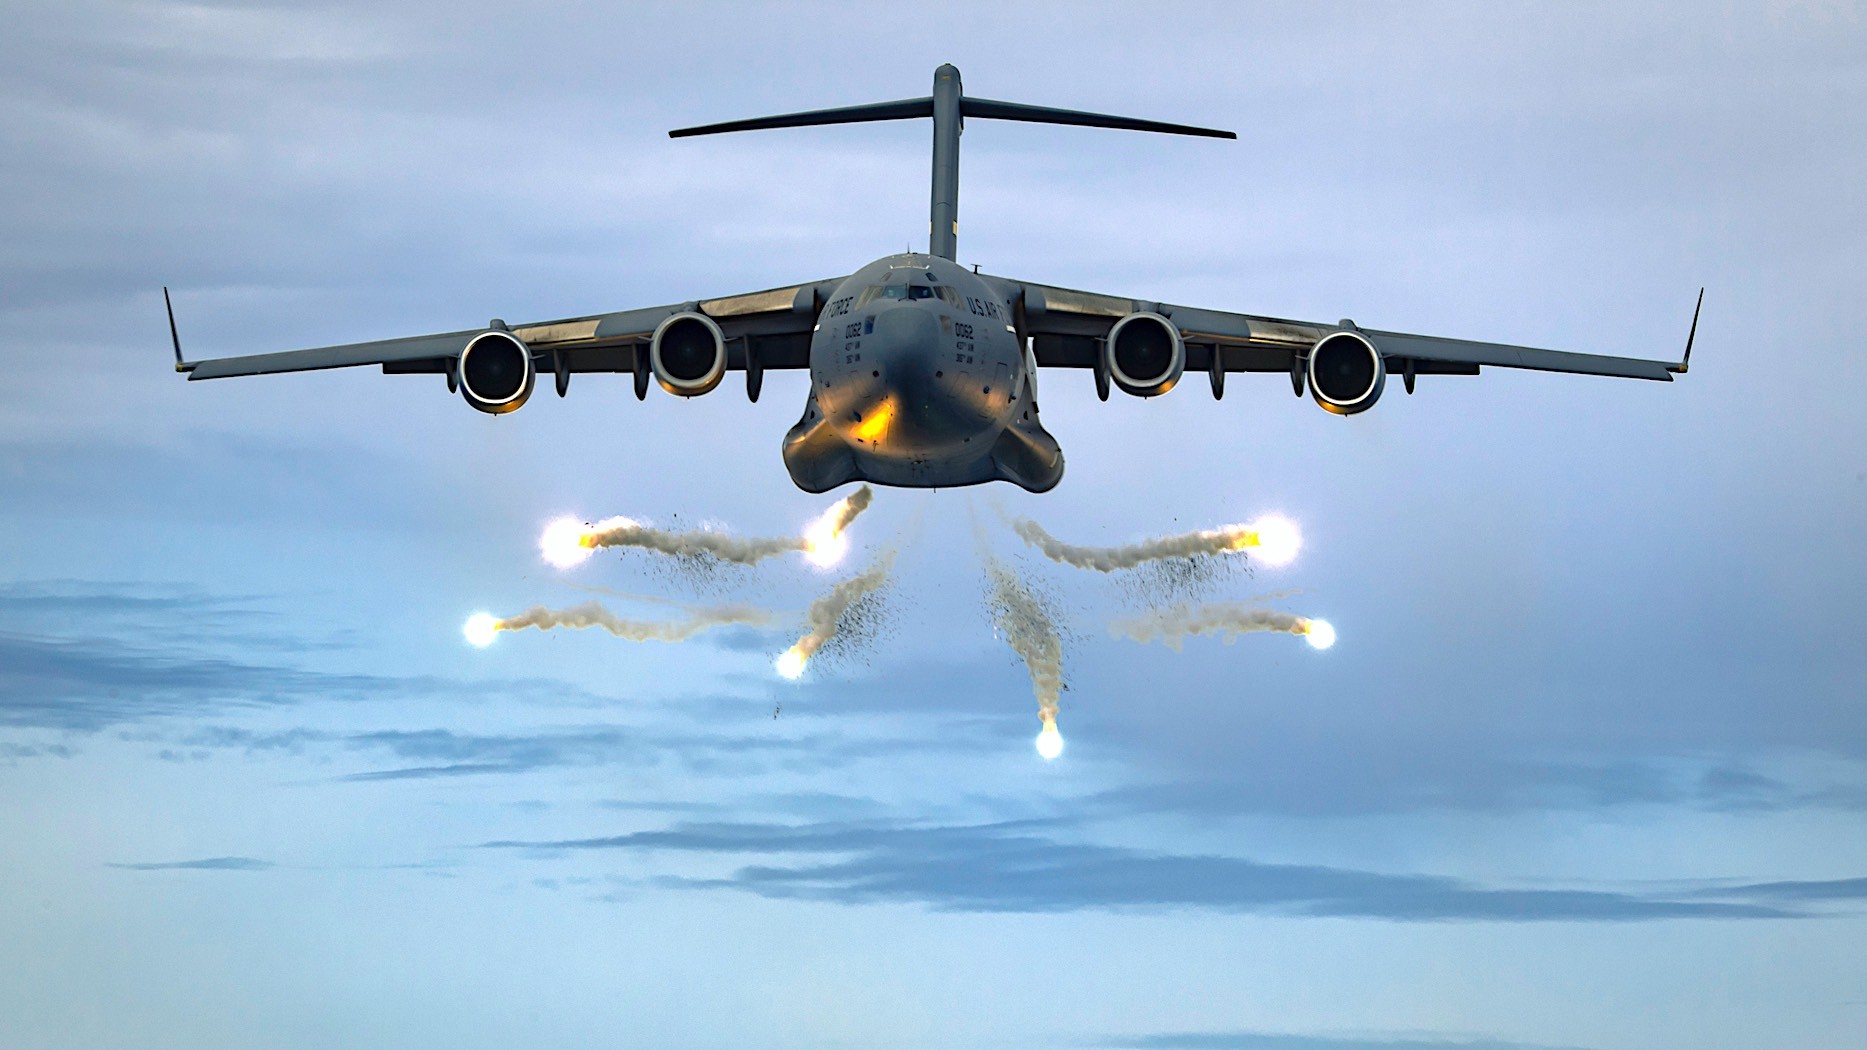 C-17 Globemaster Can Drop Cargo and Tanks, Looks Its Best When Firing  Flares - autoevolution